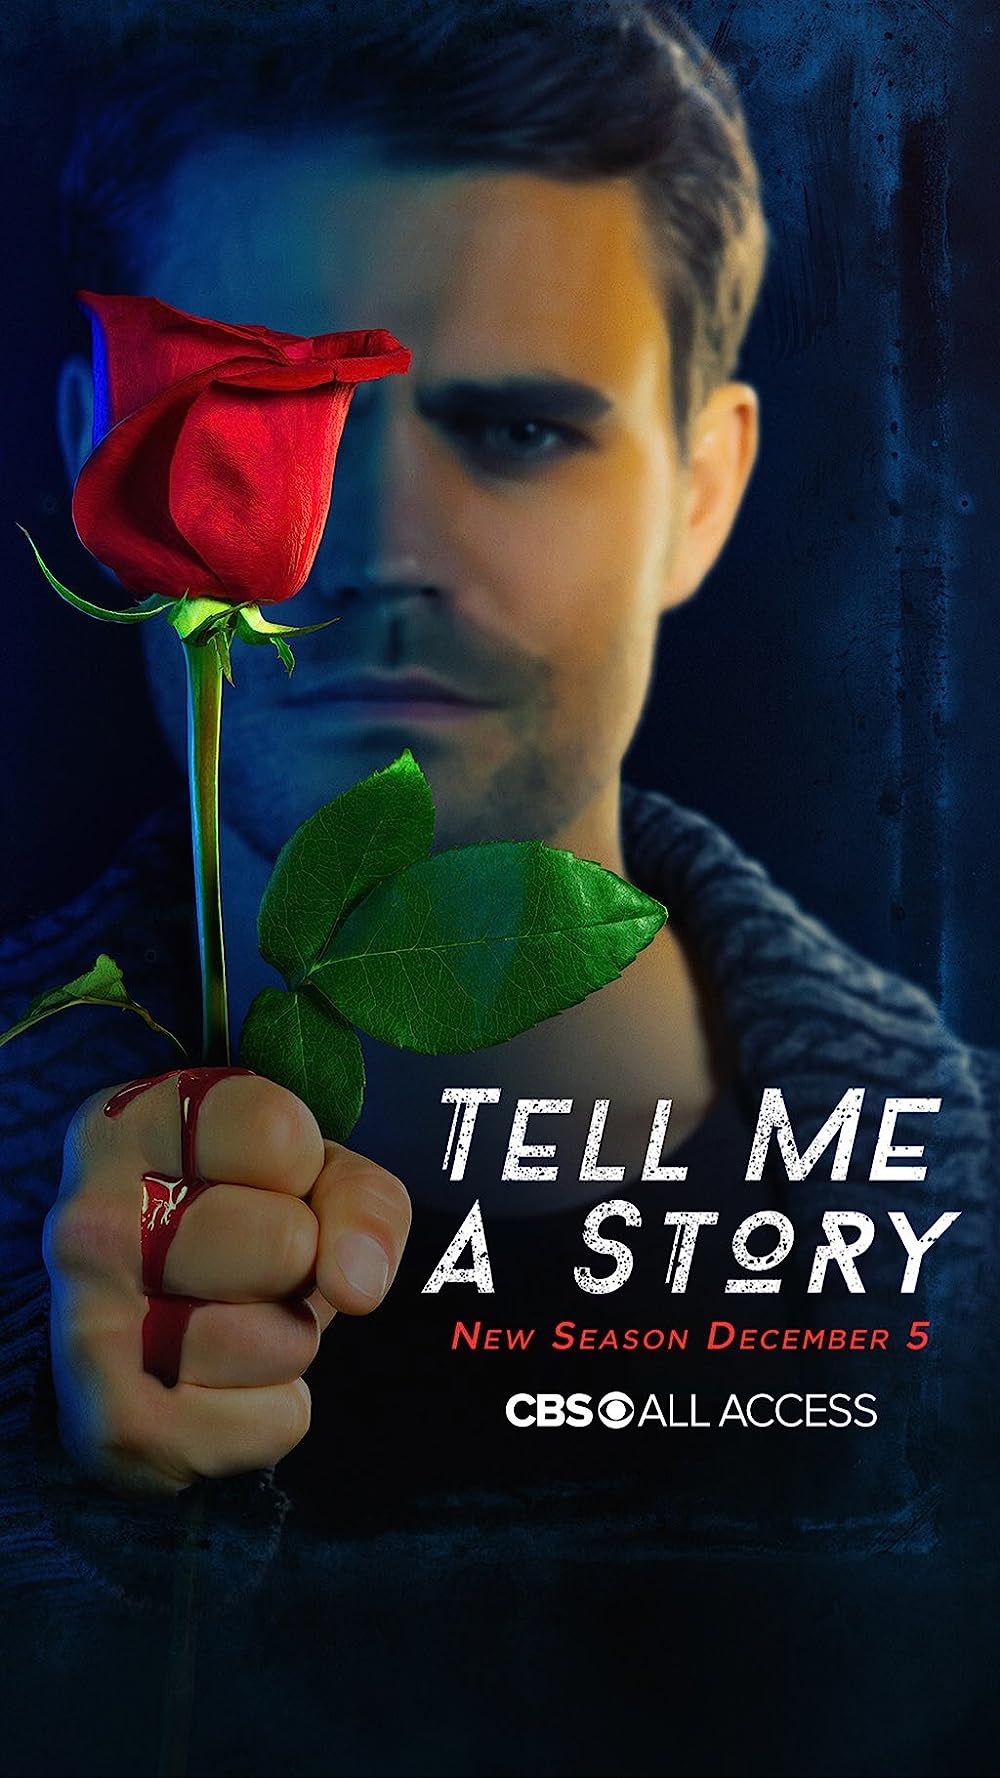 Tell Me a Story poster